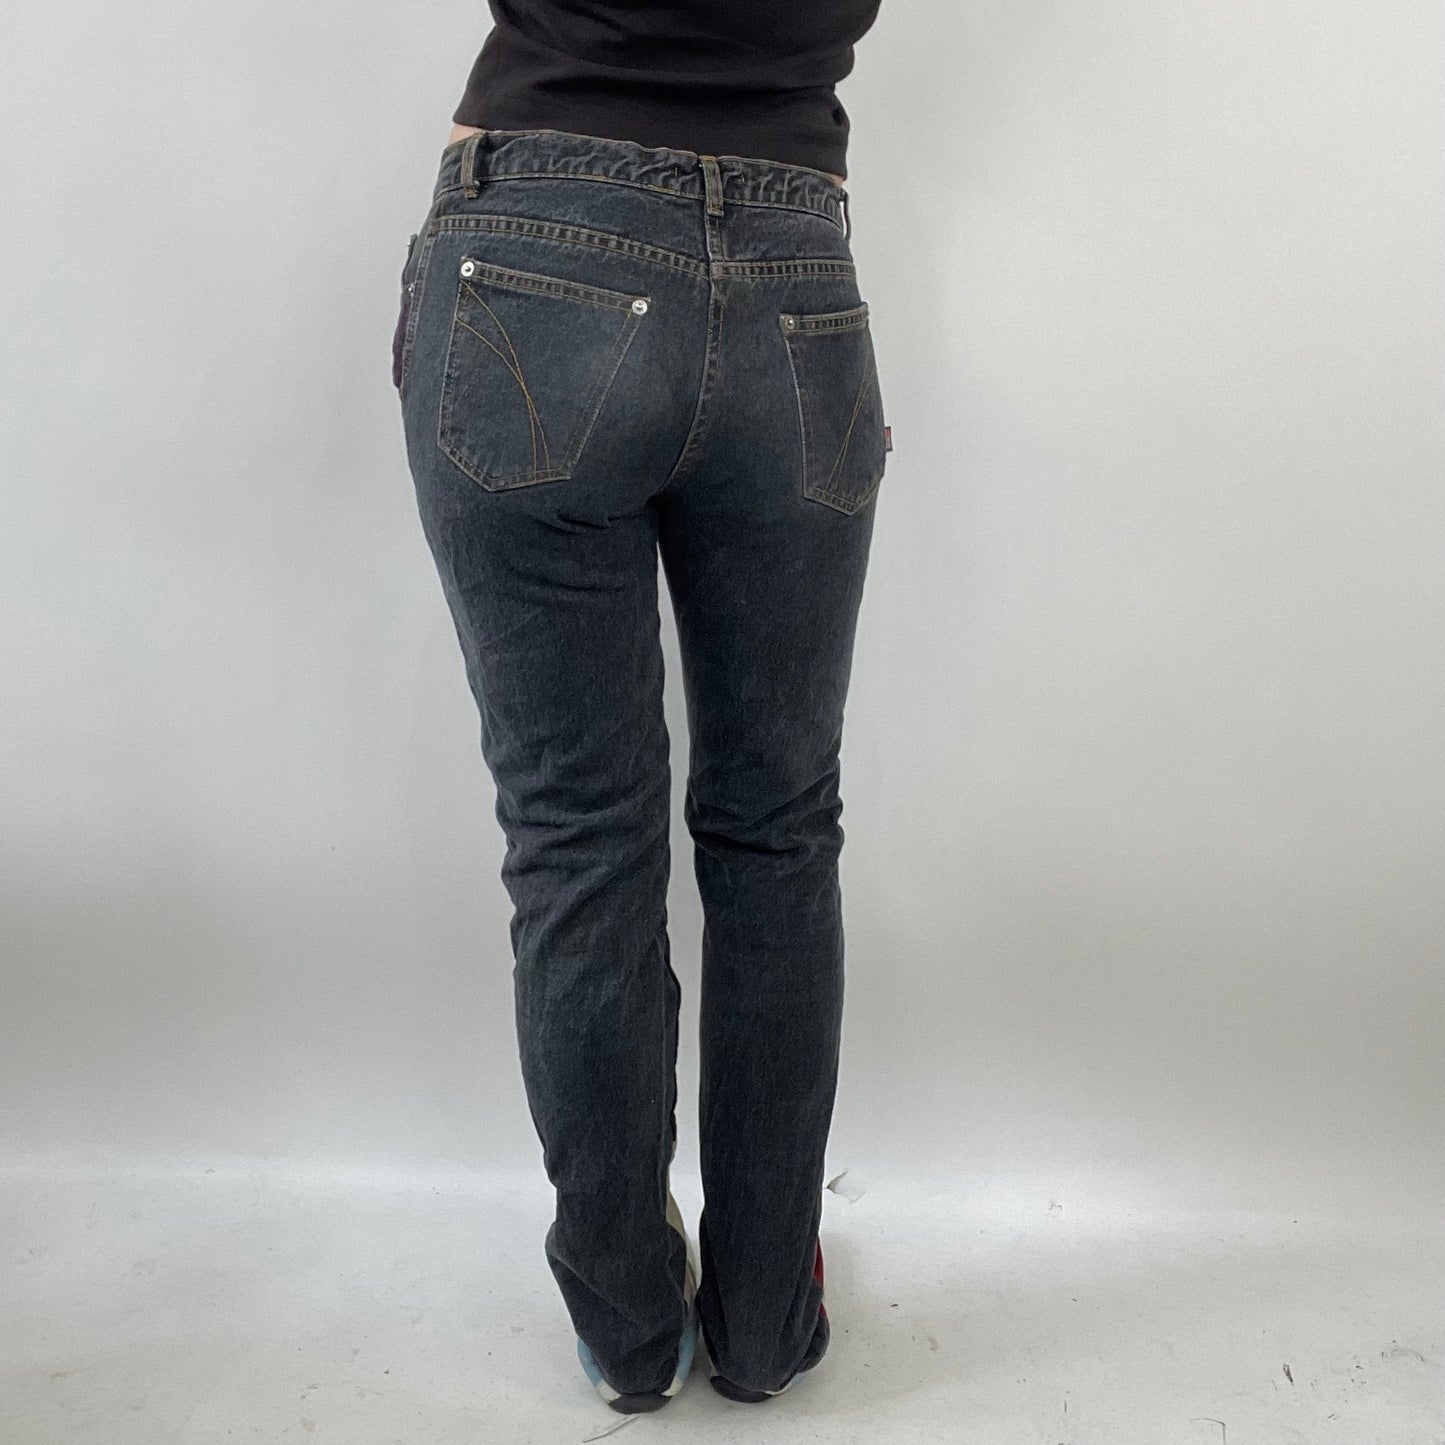 HIPPY CHIC DROP | small dark denim jeans with colourful corduroy patch detail